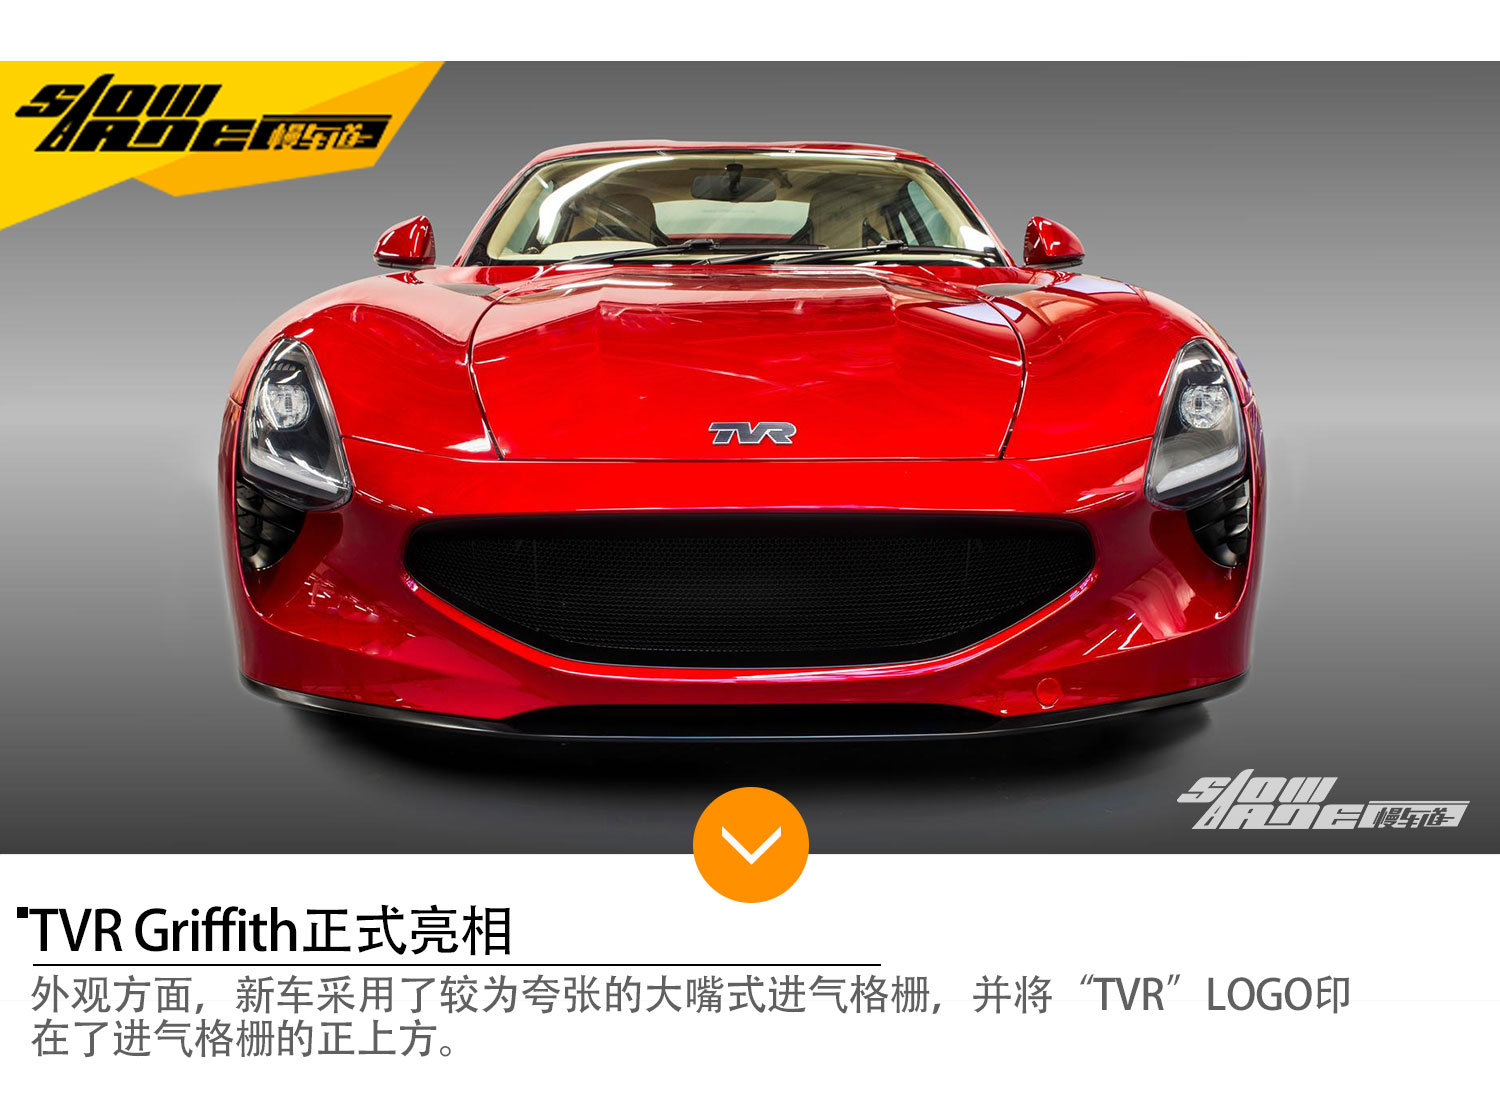 TVR Griffith正式亮相 搭5.0L V8发动机